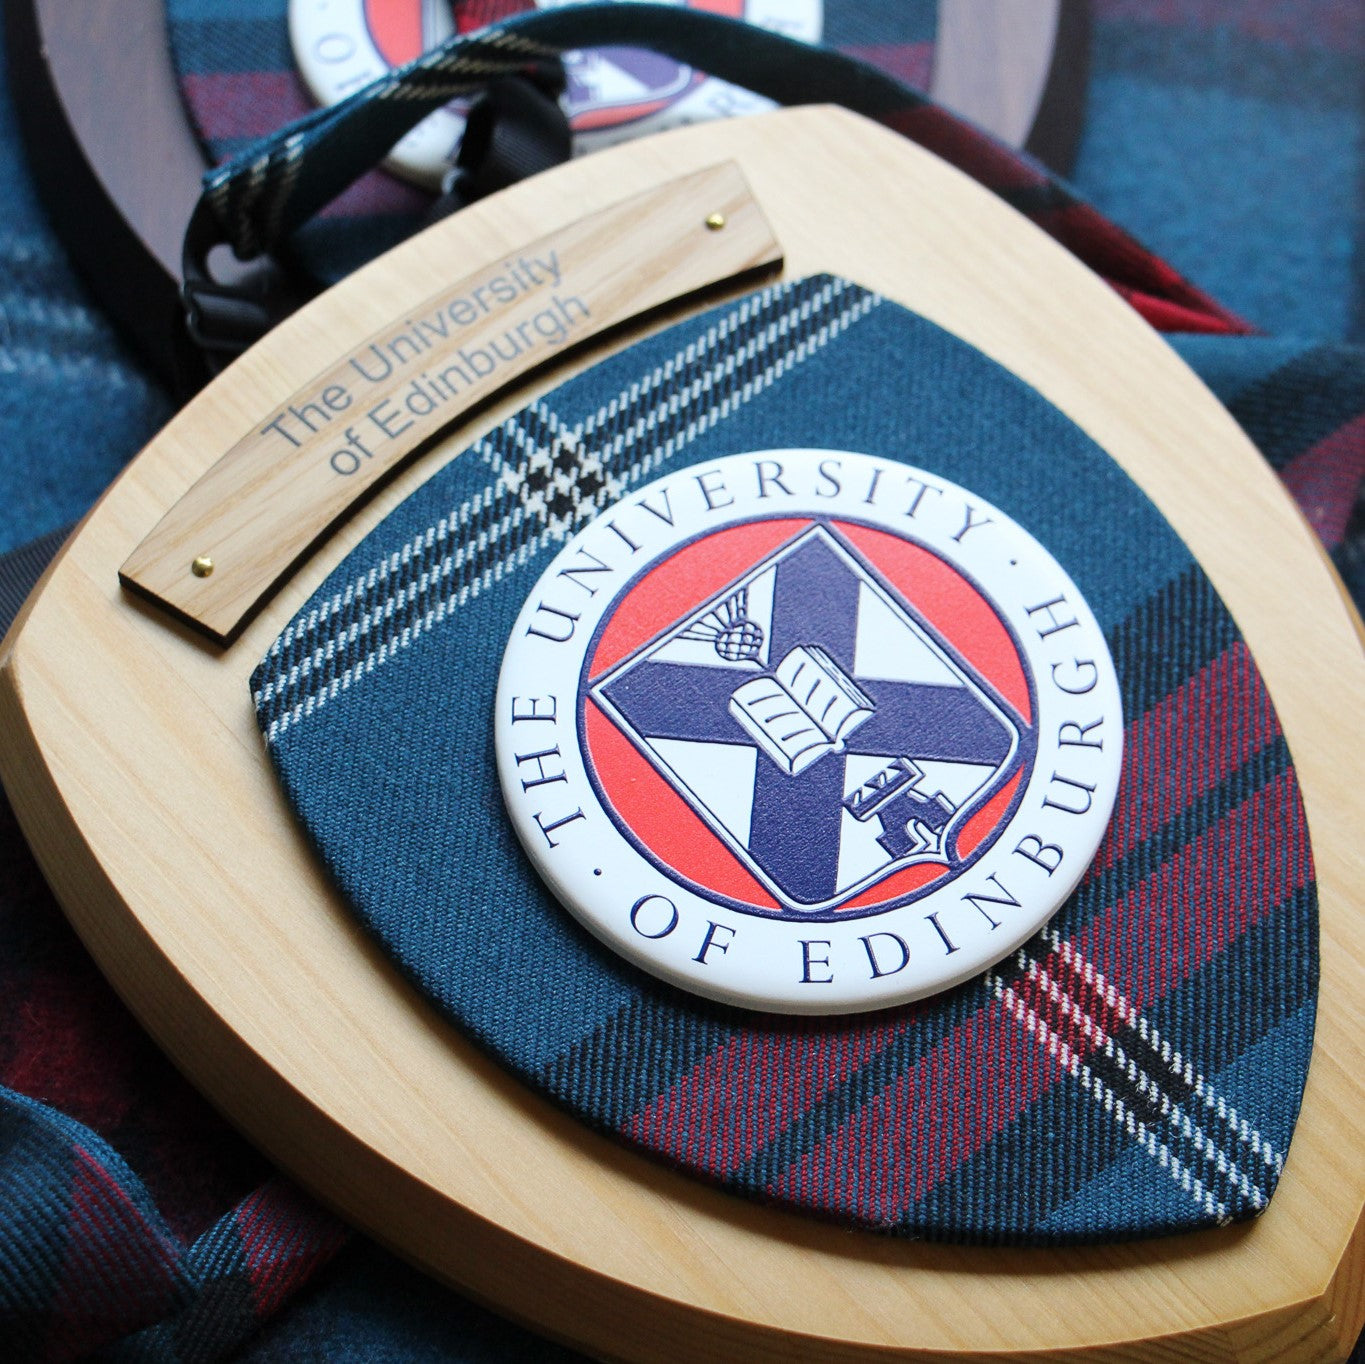 Wall plaque with light wood featuring university tartan, university crest and engrave plate saying 'The University of Edinburgh', pictured next to tartan tie